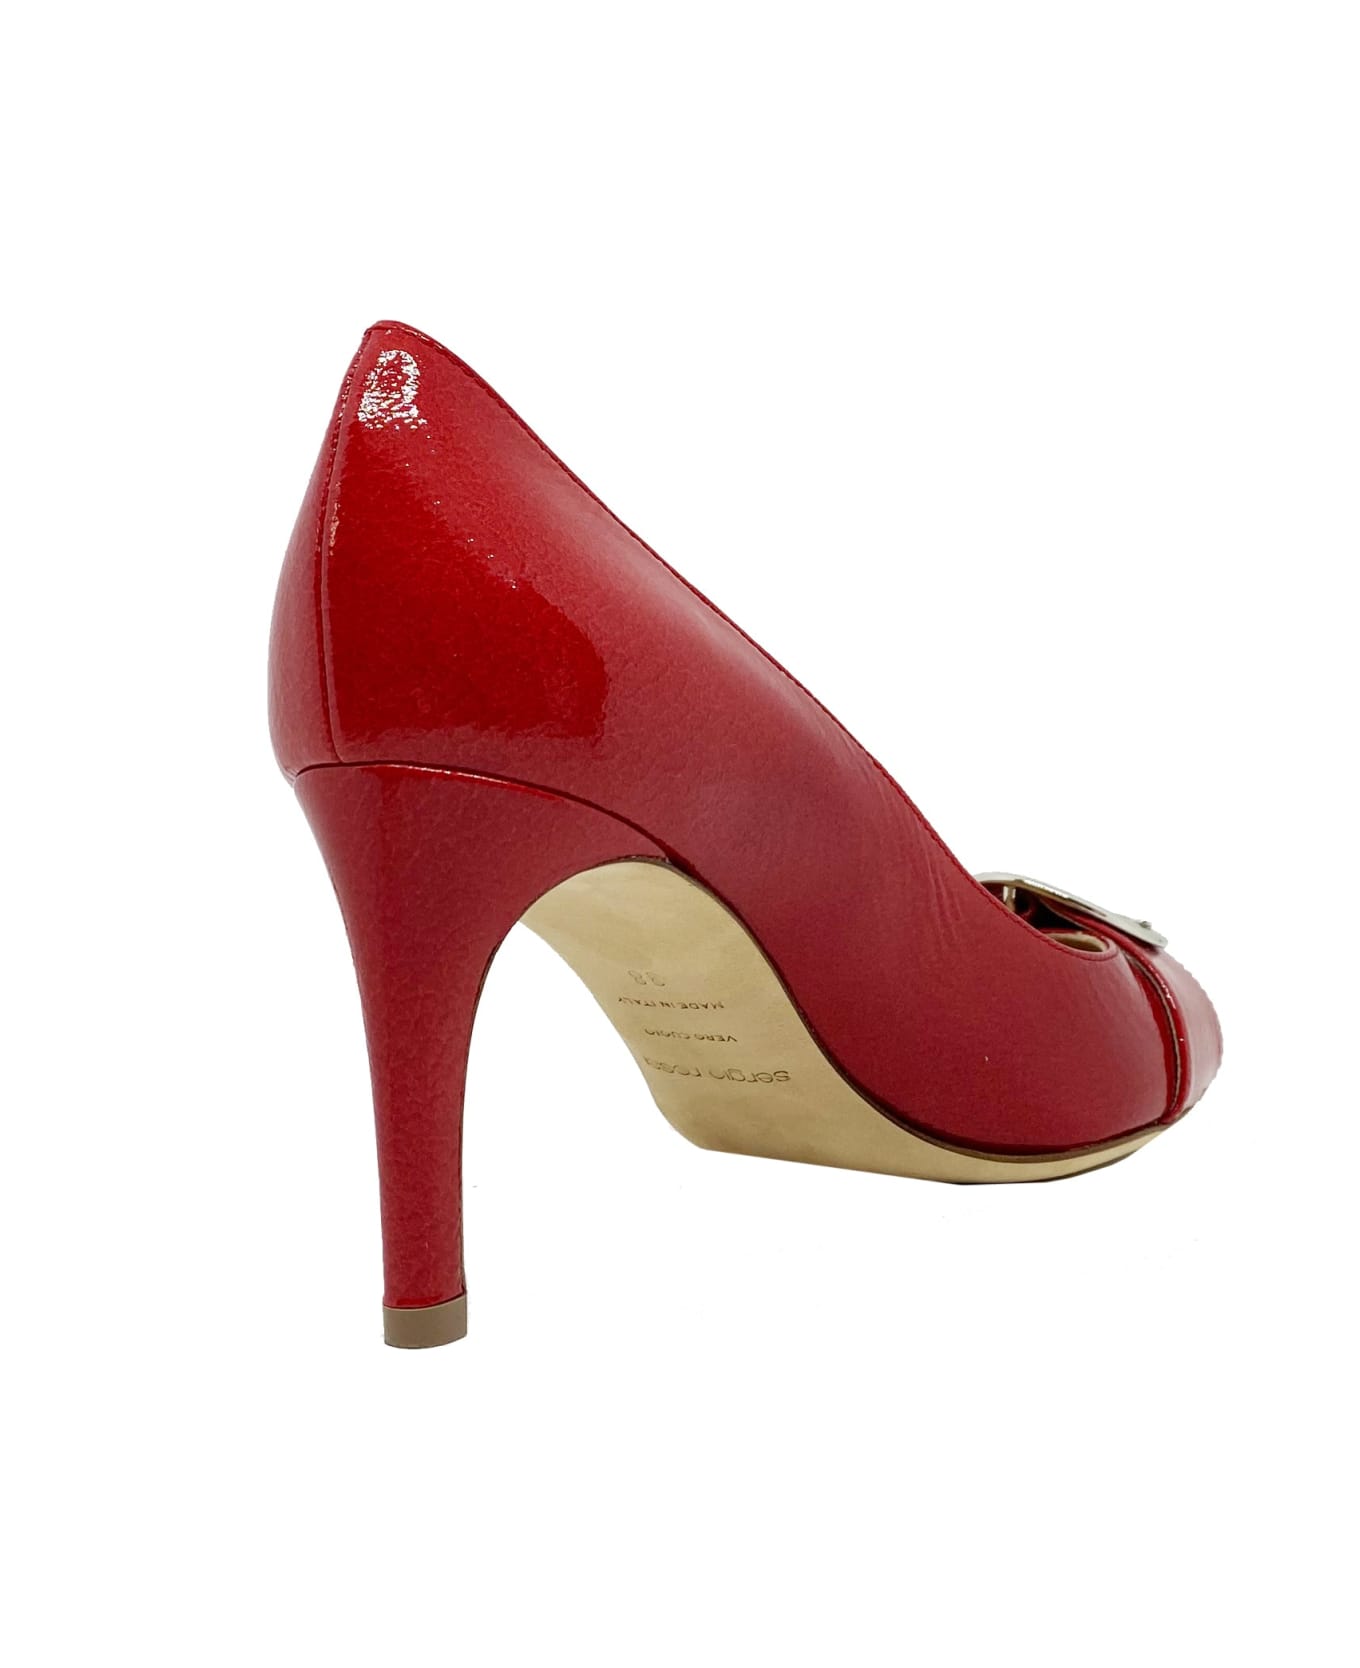 Sergio Rossi Patent Leather Pumps - Red